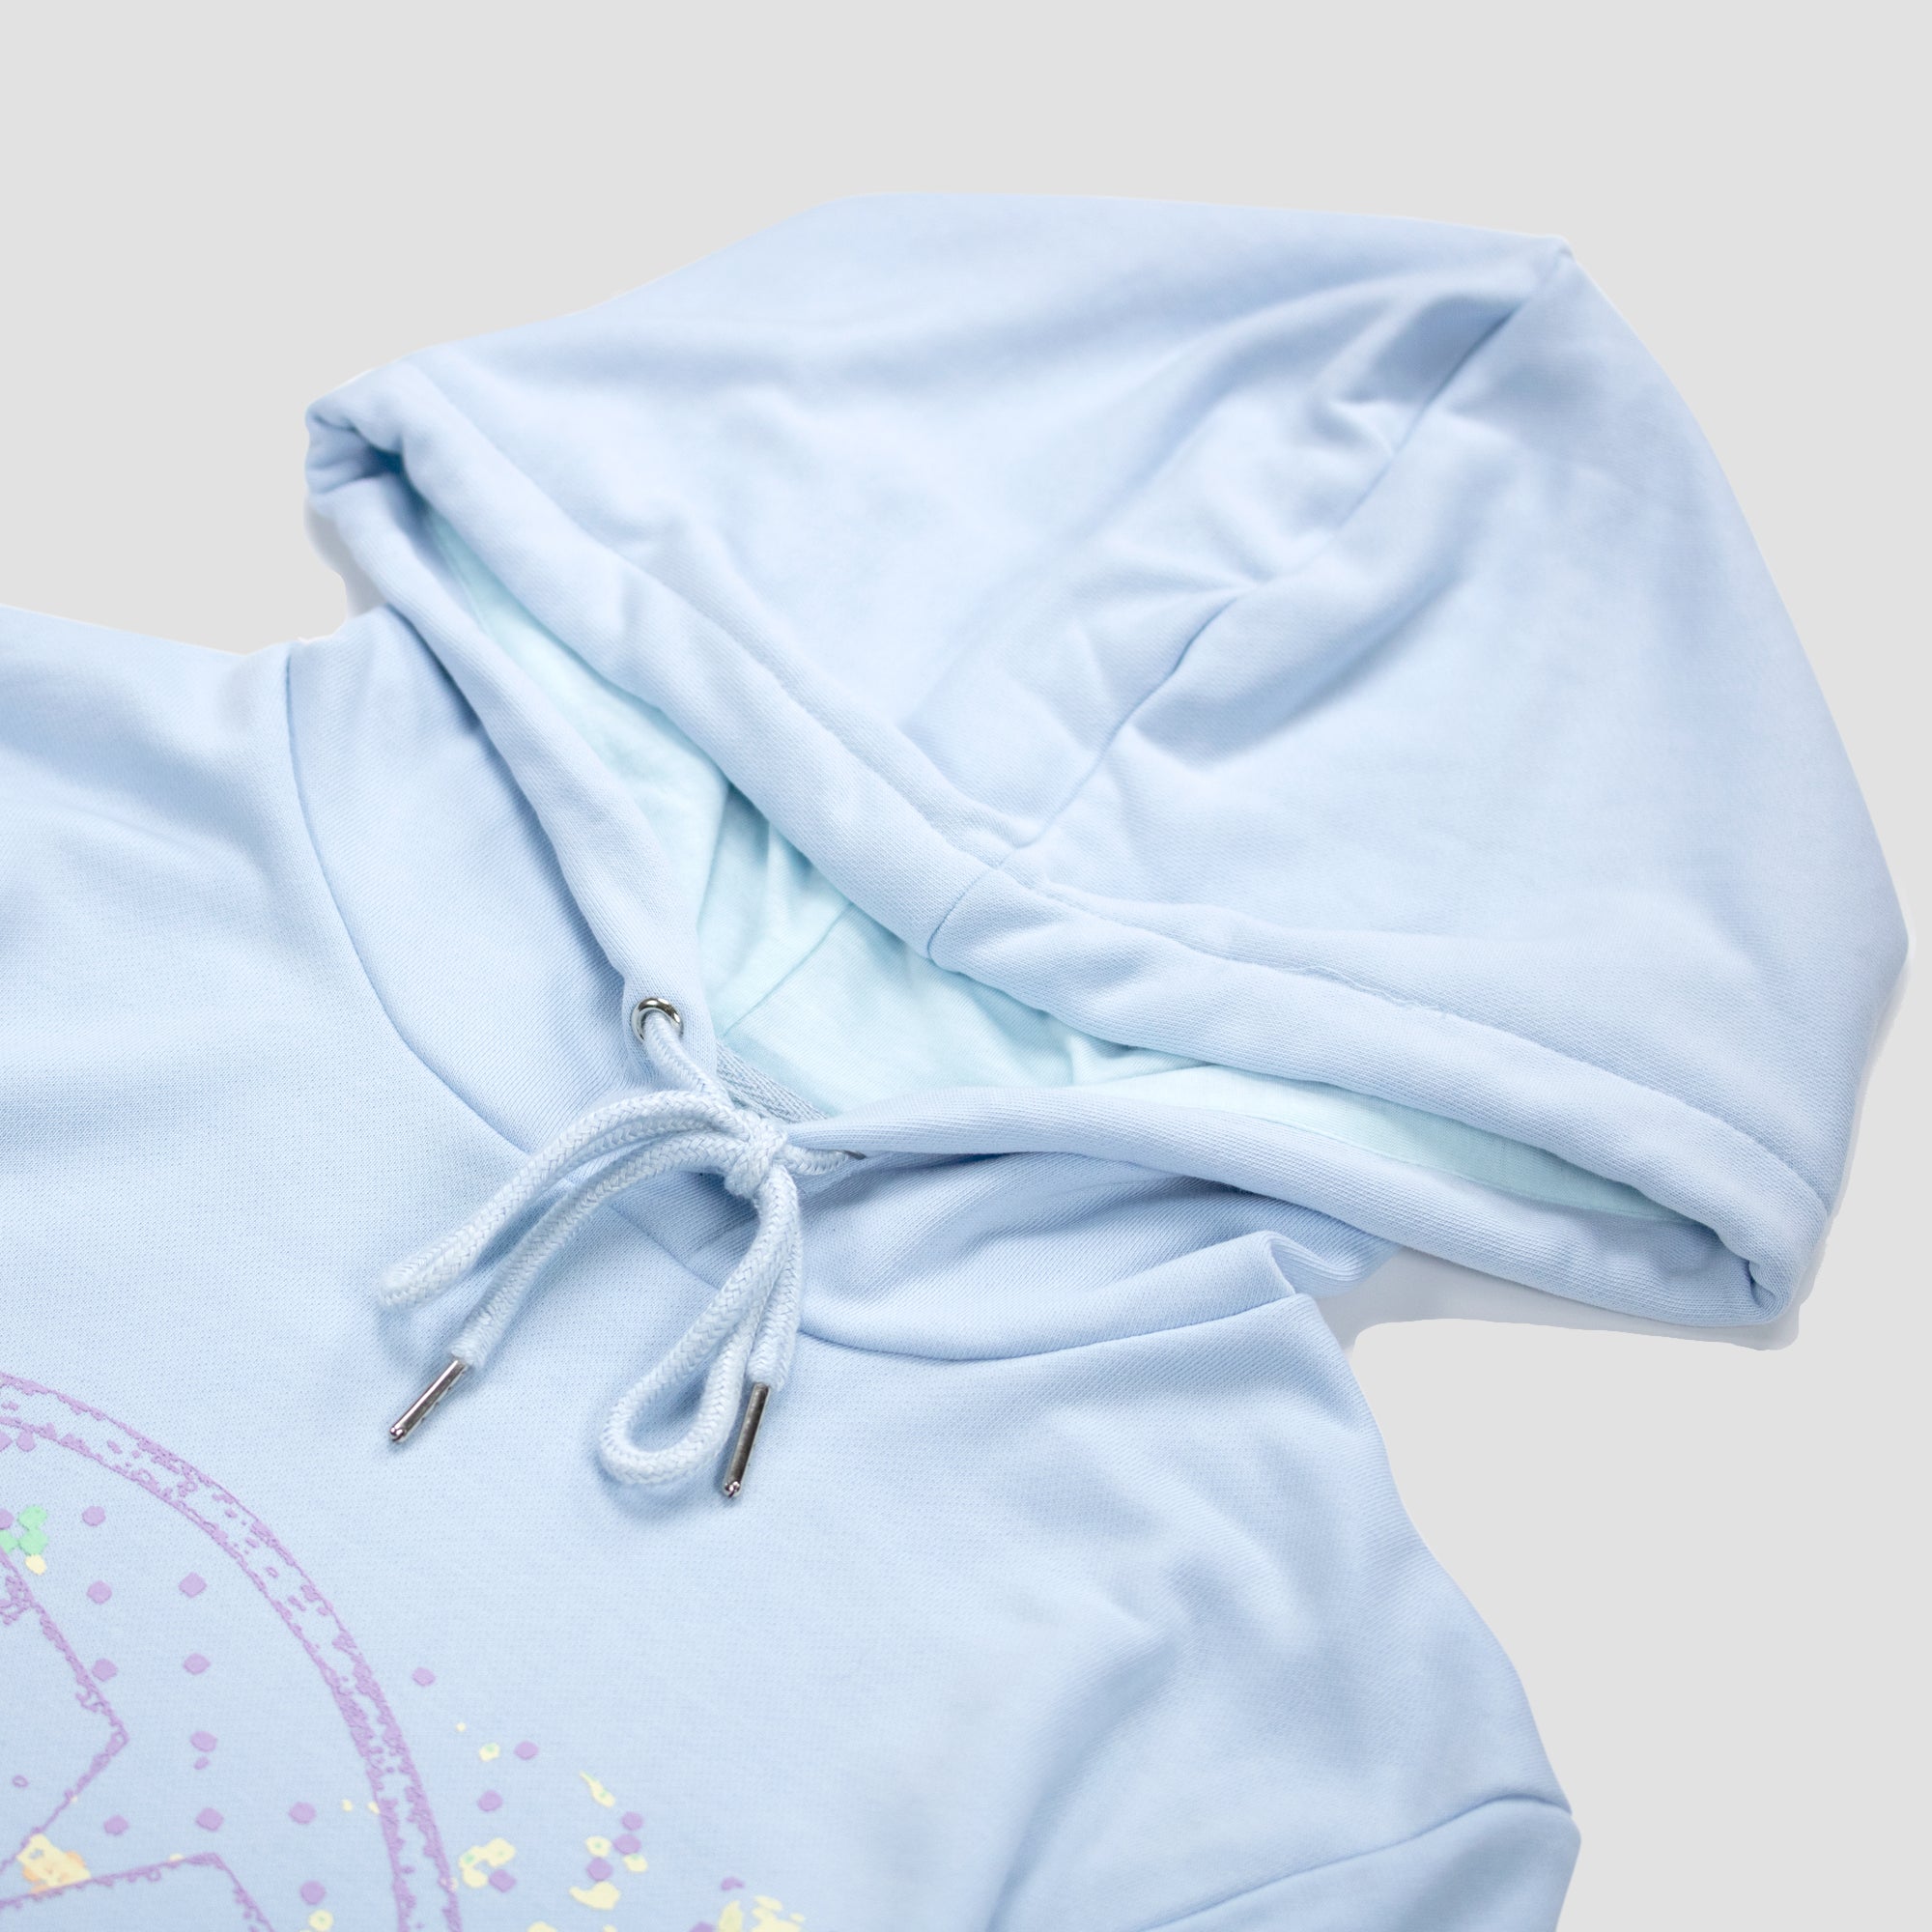 LOCATION NOT FOUND HOODIE - PALE BLUE